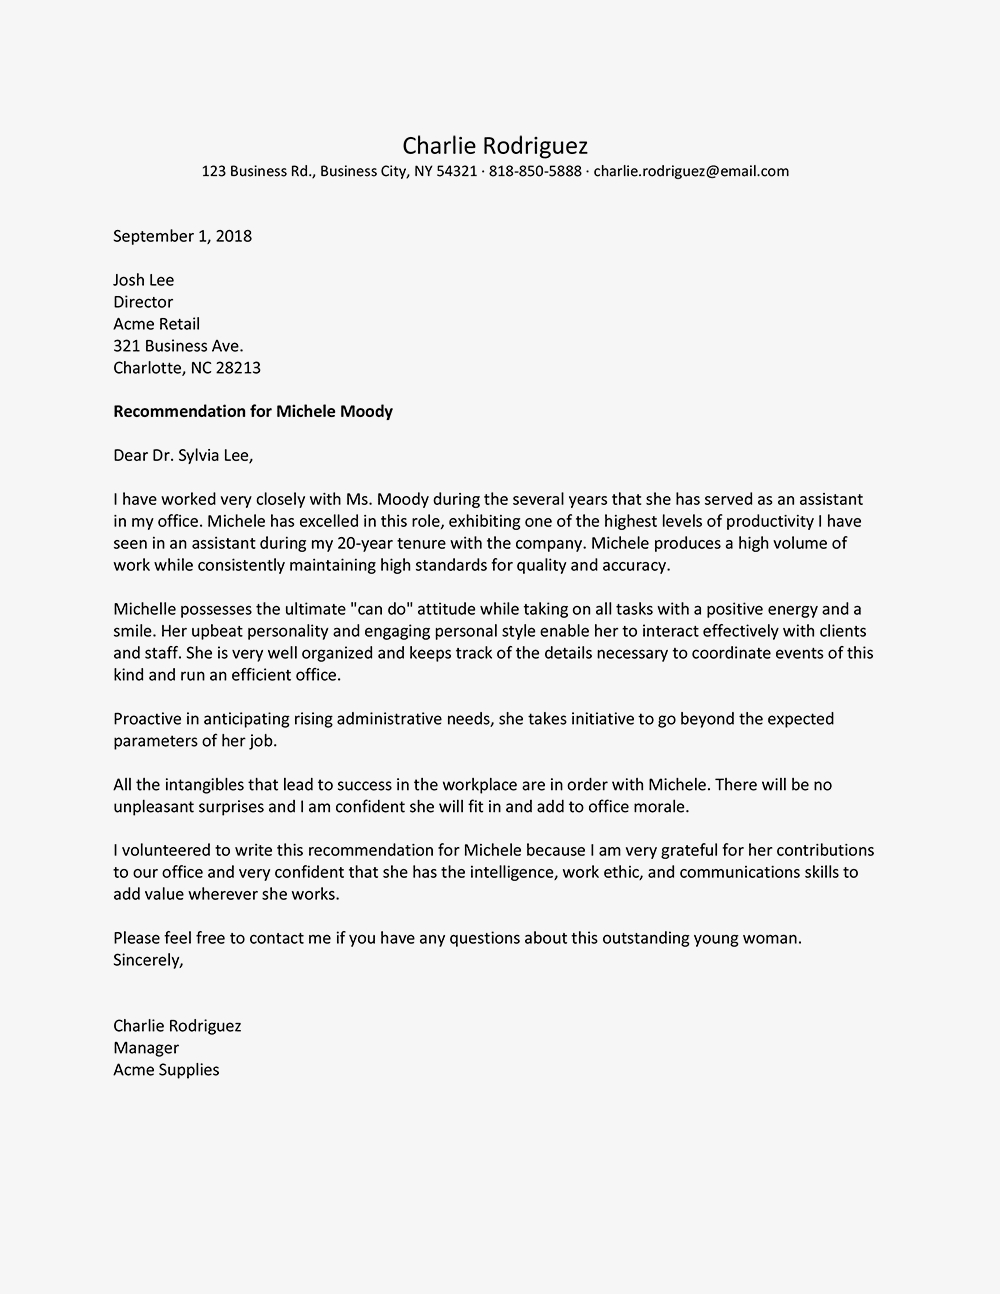 Work Ethics Reference Letter • Invitation Template Ideas